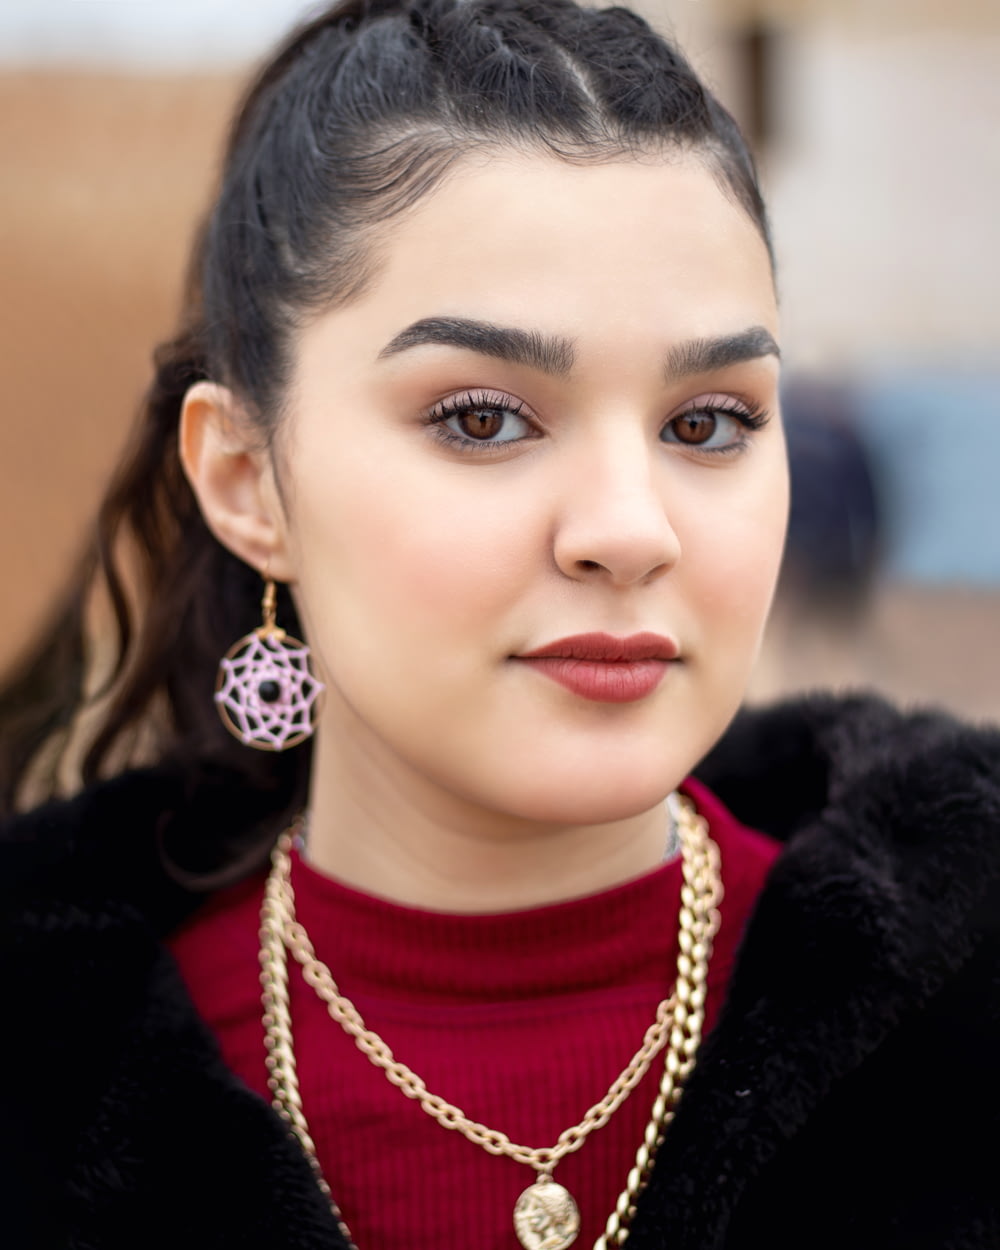 a woman wearing a red sweater and gold necklace